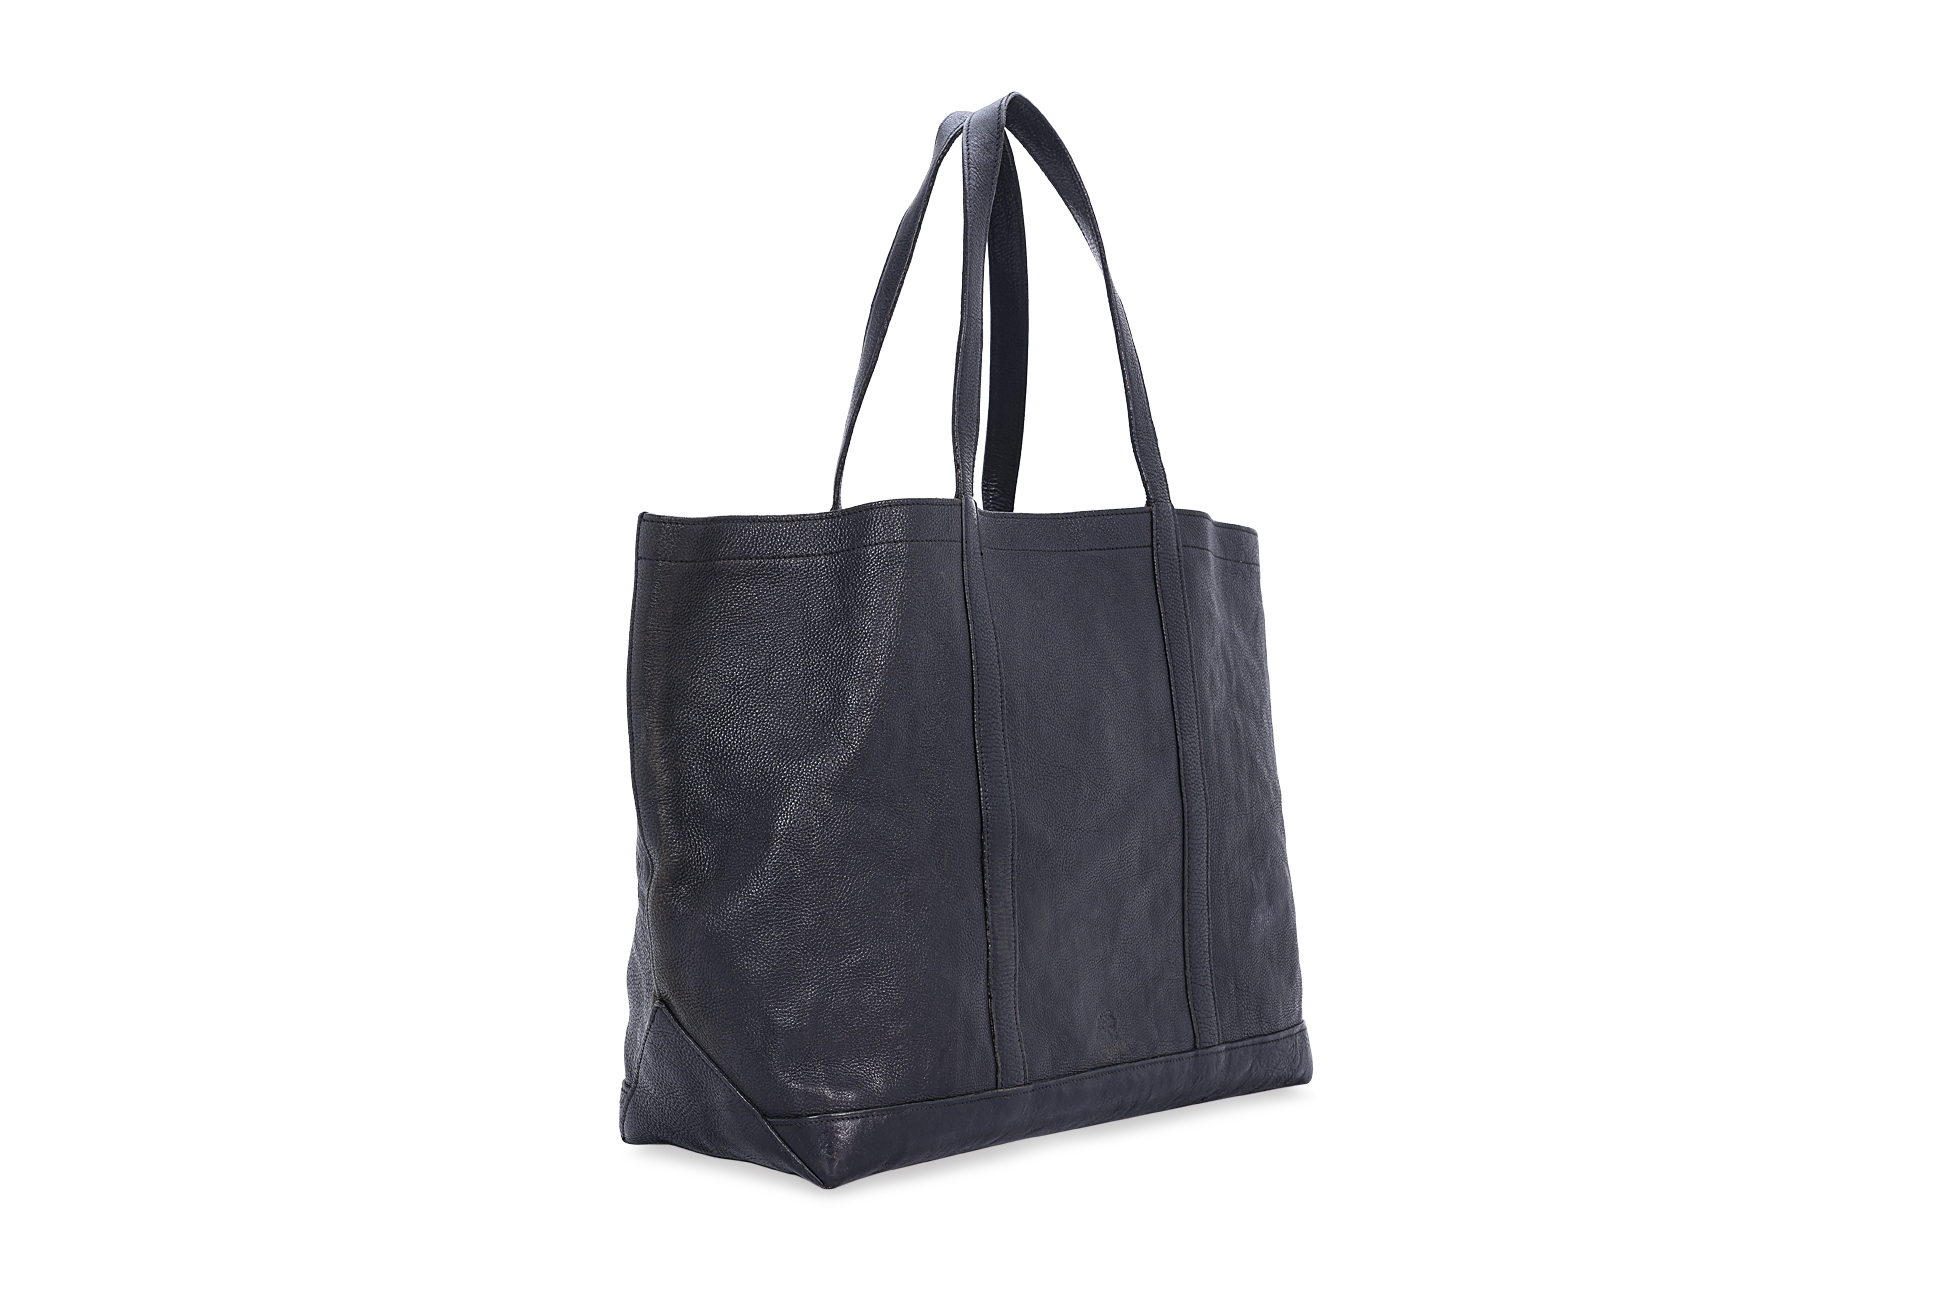 A MULBERRY BLACK LEATHER TOTE BAG - Image 2 of 3